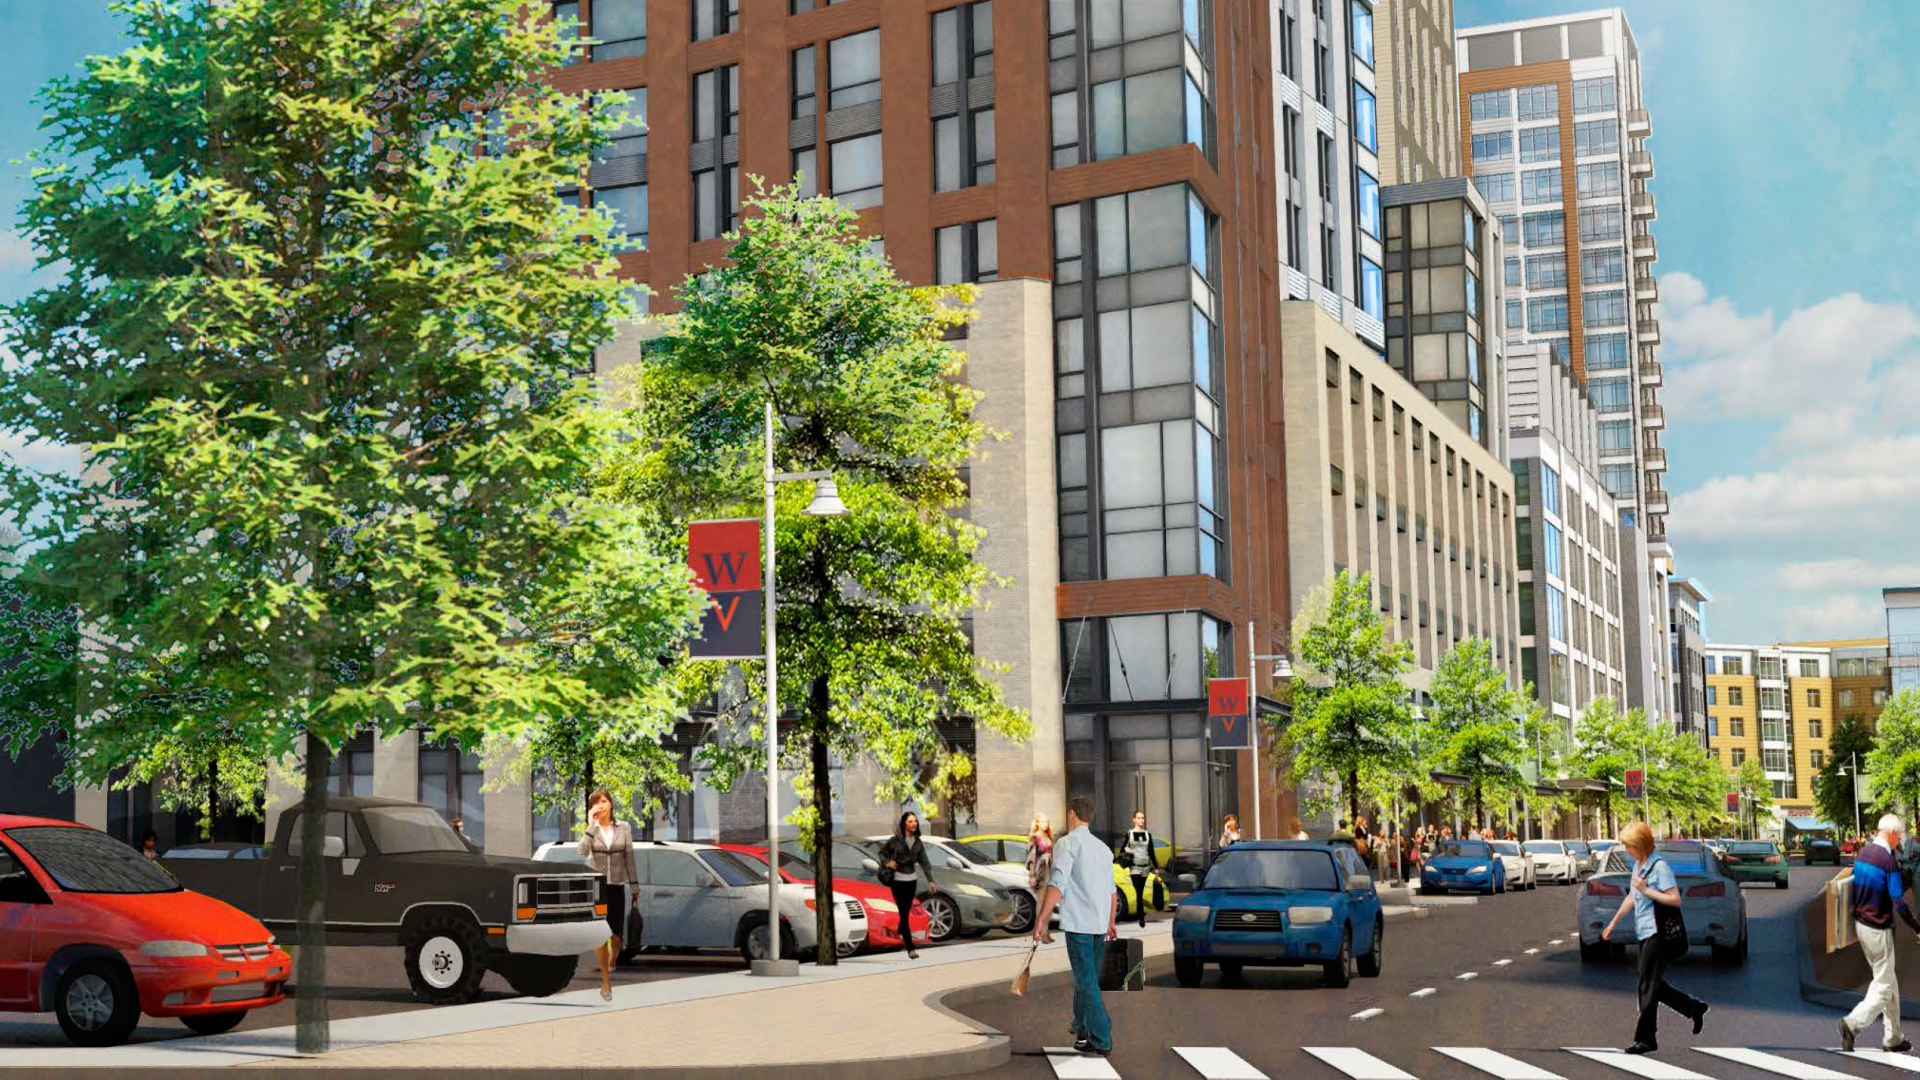 BOSTON BUSINESS JOURNAL: First Look – Massive Mixed-Use Residential Village Proposed In South Boston